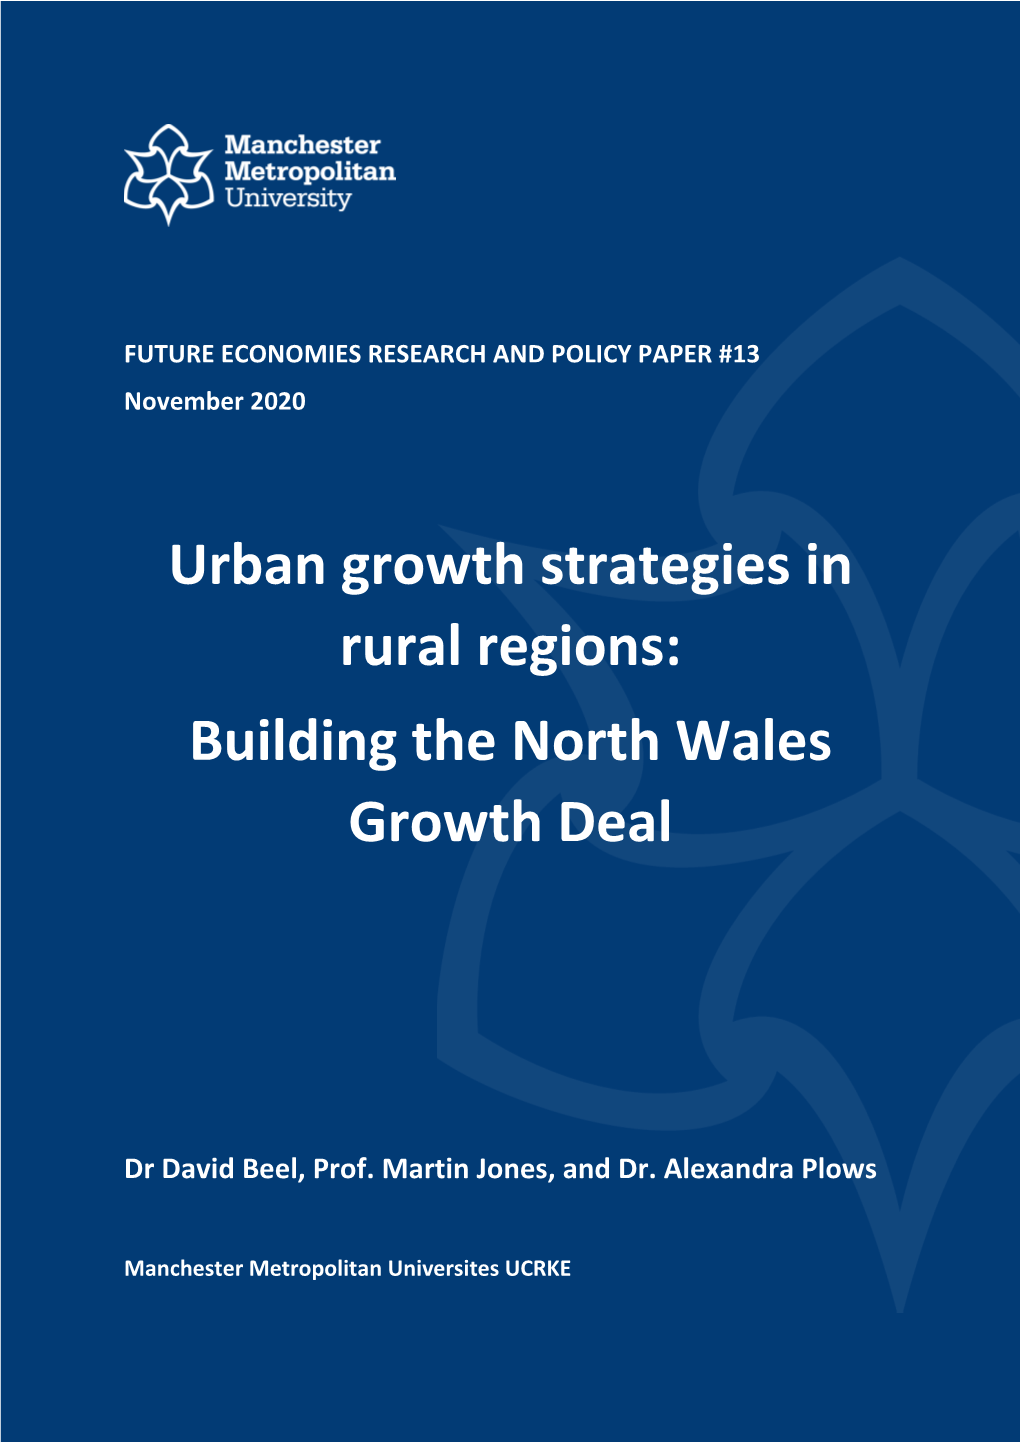 Building the North Wales Growth Deal